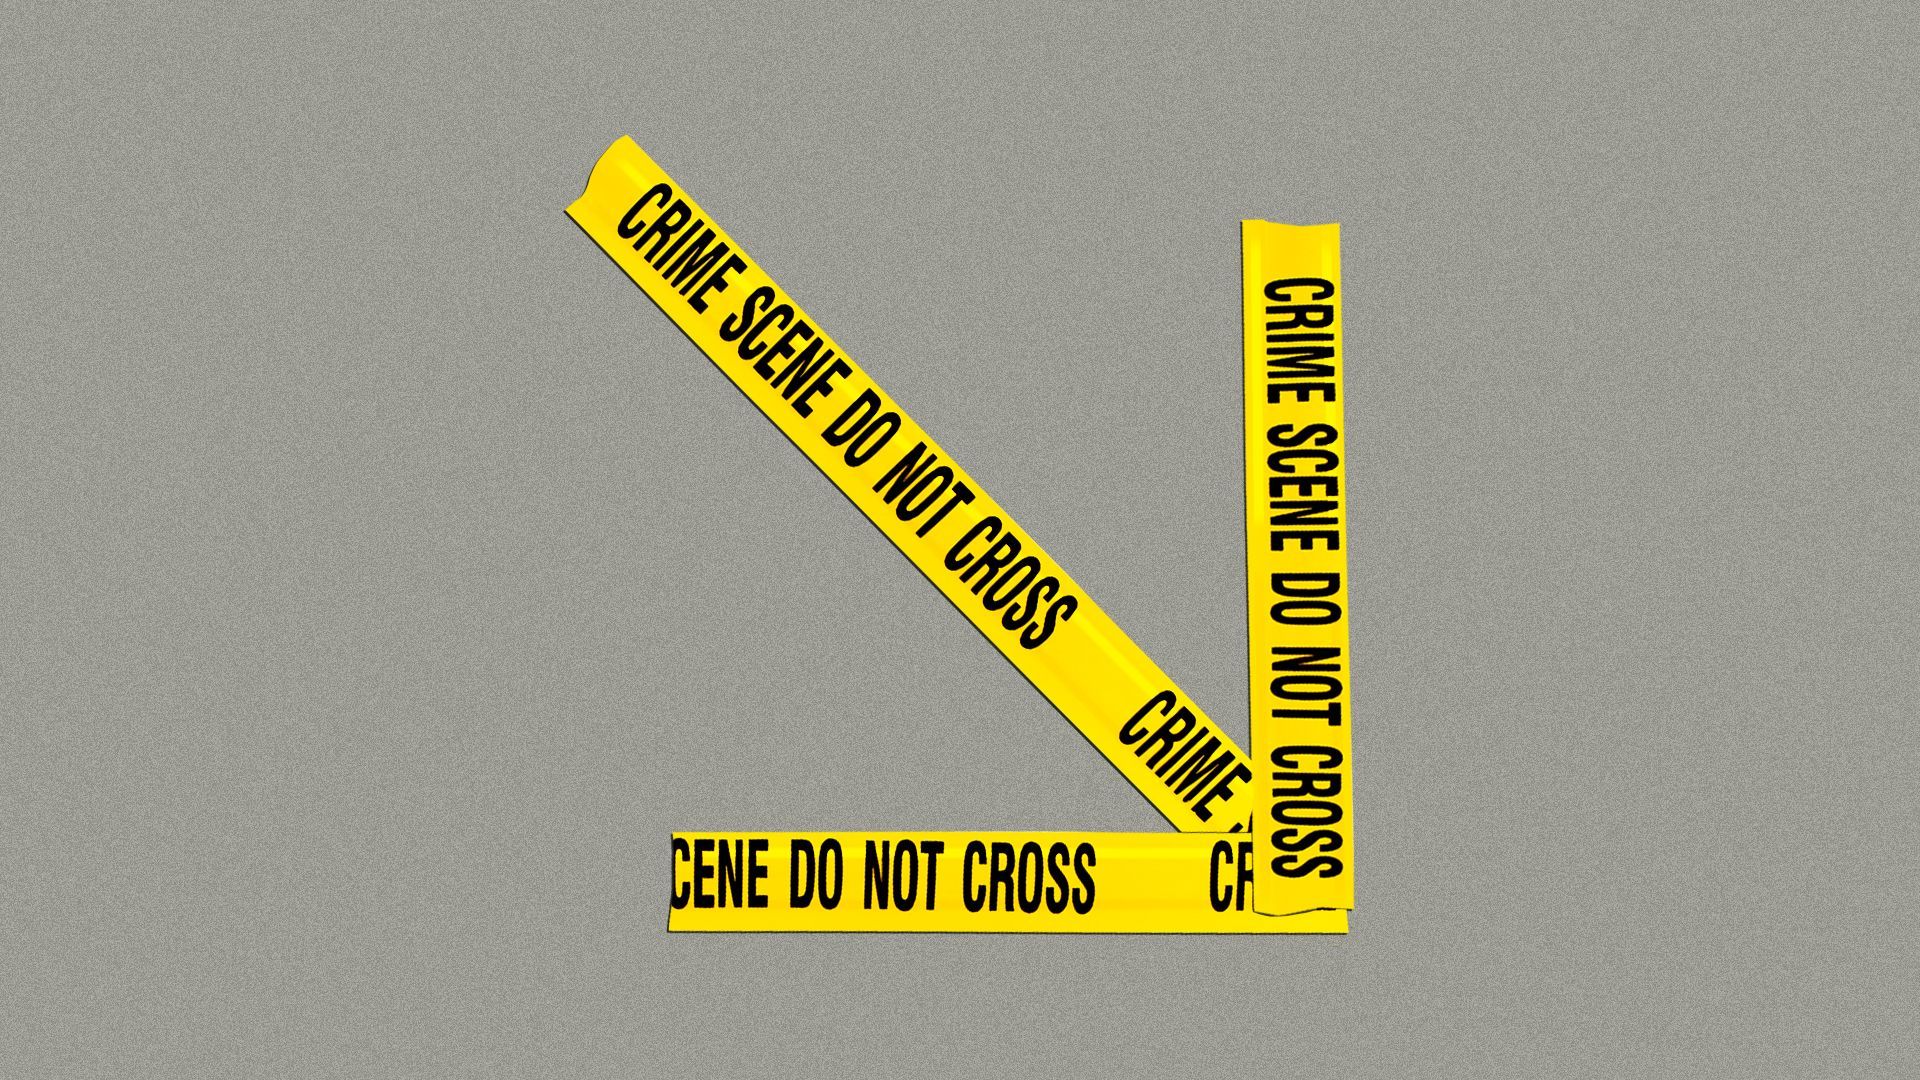 Illustration of a downward arrow made out of crime-scene tape.